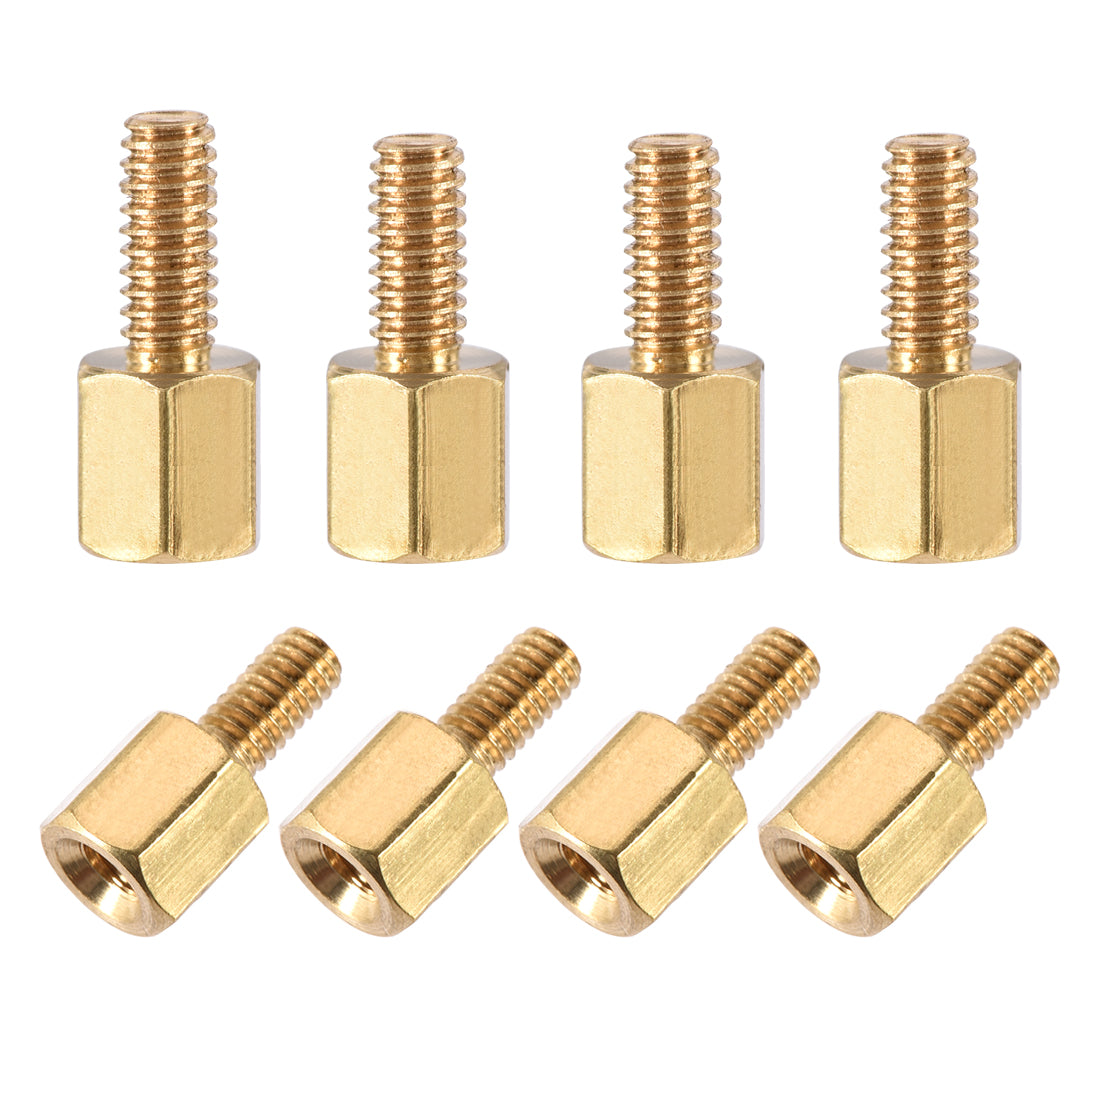 uxcell 20 PCS Hex Standoff Spacer M4 5+6mm Male Female Hexagonal Thread  Brass Spacer Standoff Screws Nuts Spacers Standoffs for PCB Motherboard